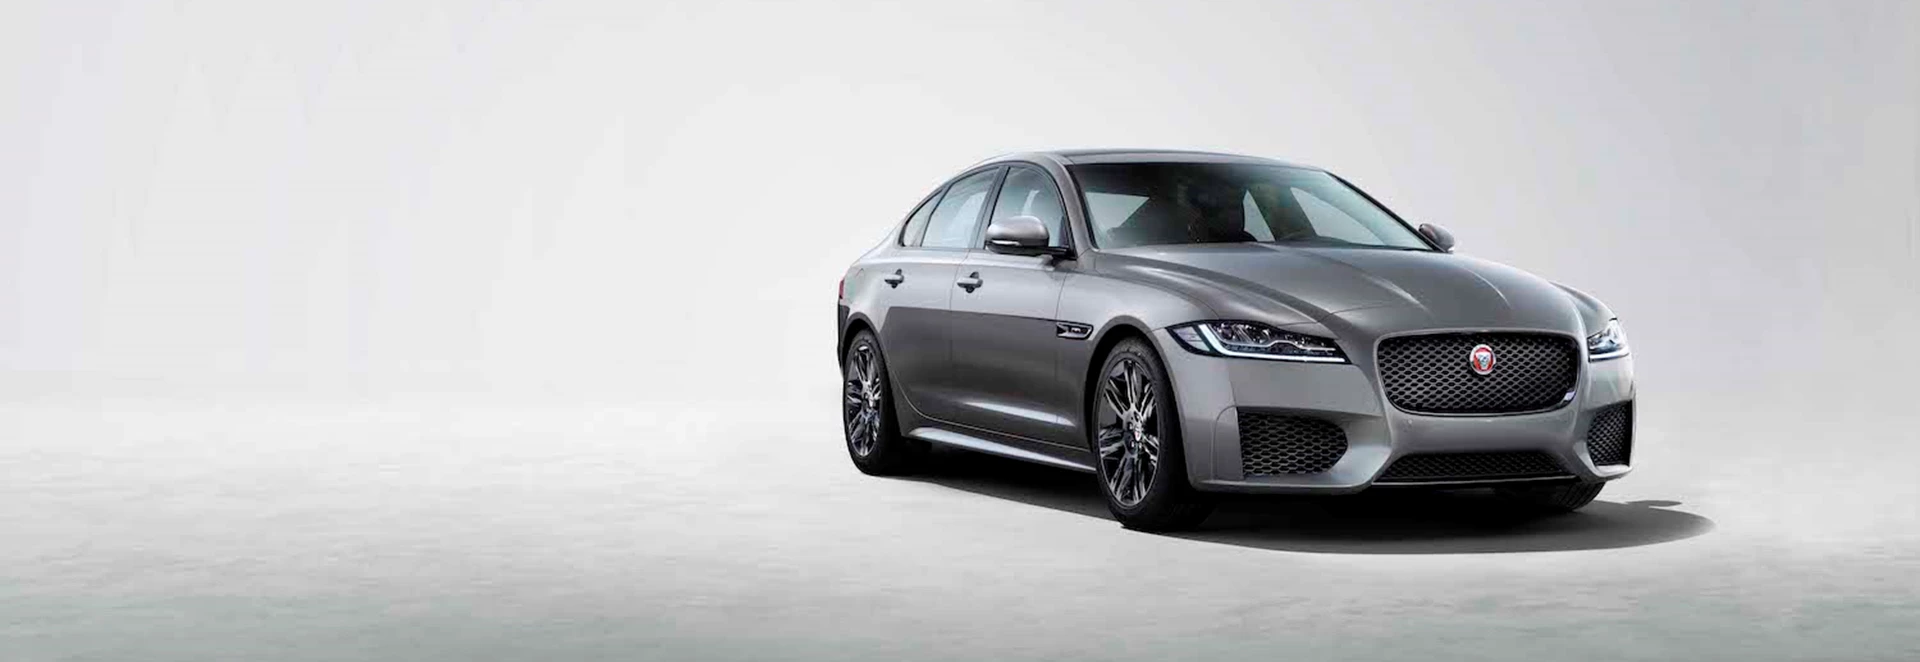 Jaguar releases Chequered Flag edition for XF line-up